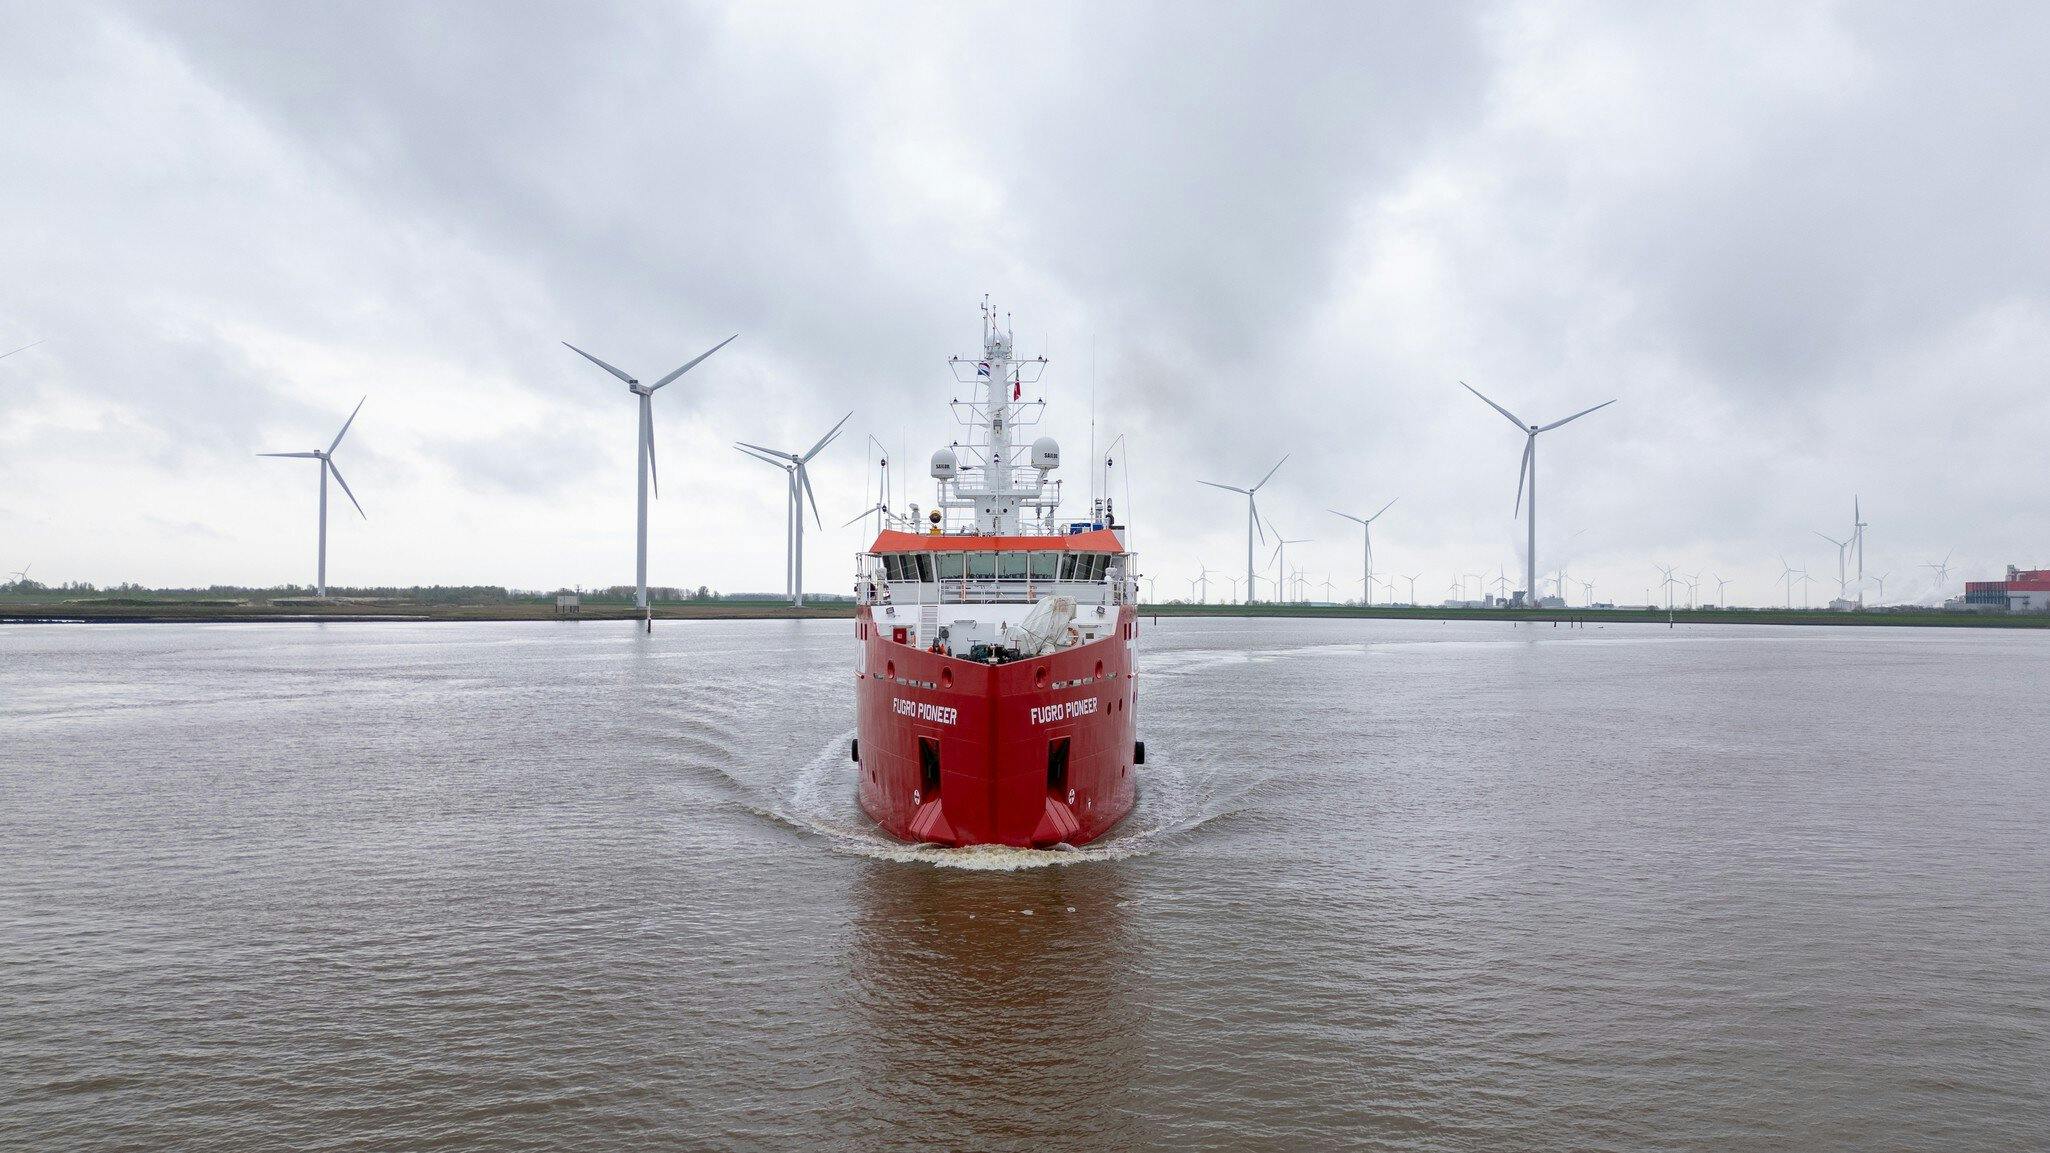 Fugro Pioneer leaving the dock in Delfzijl after methanol conversion